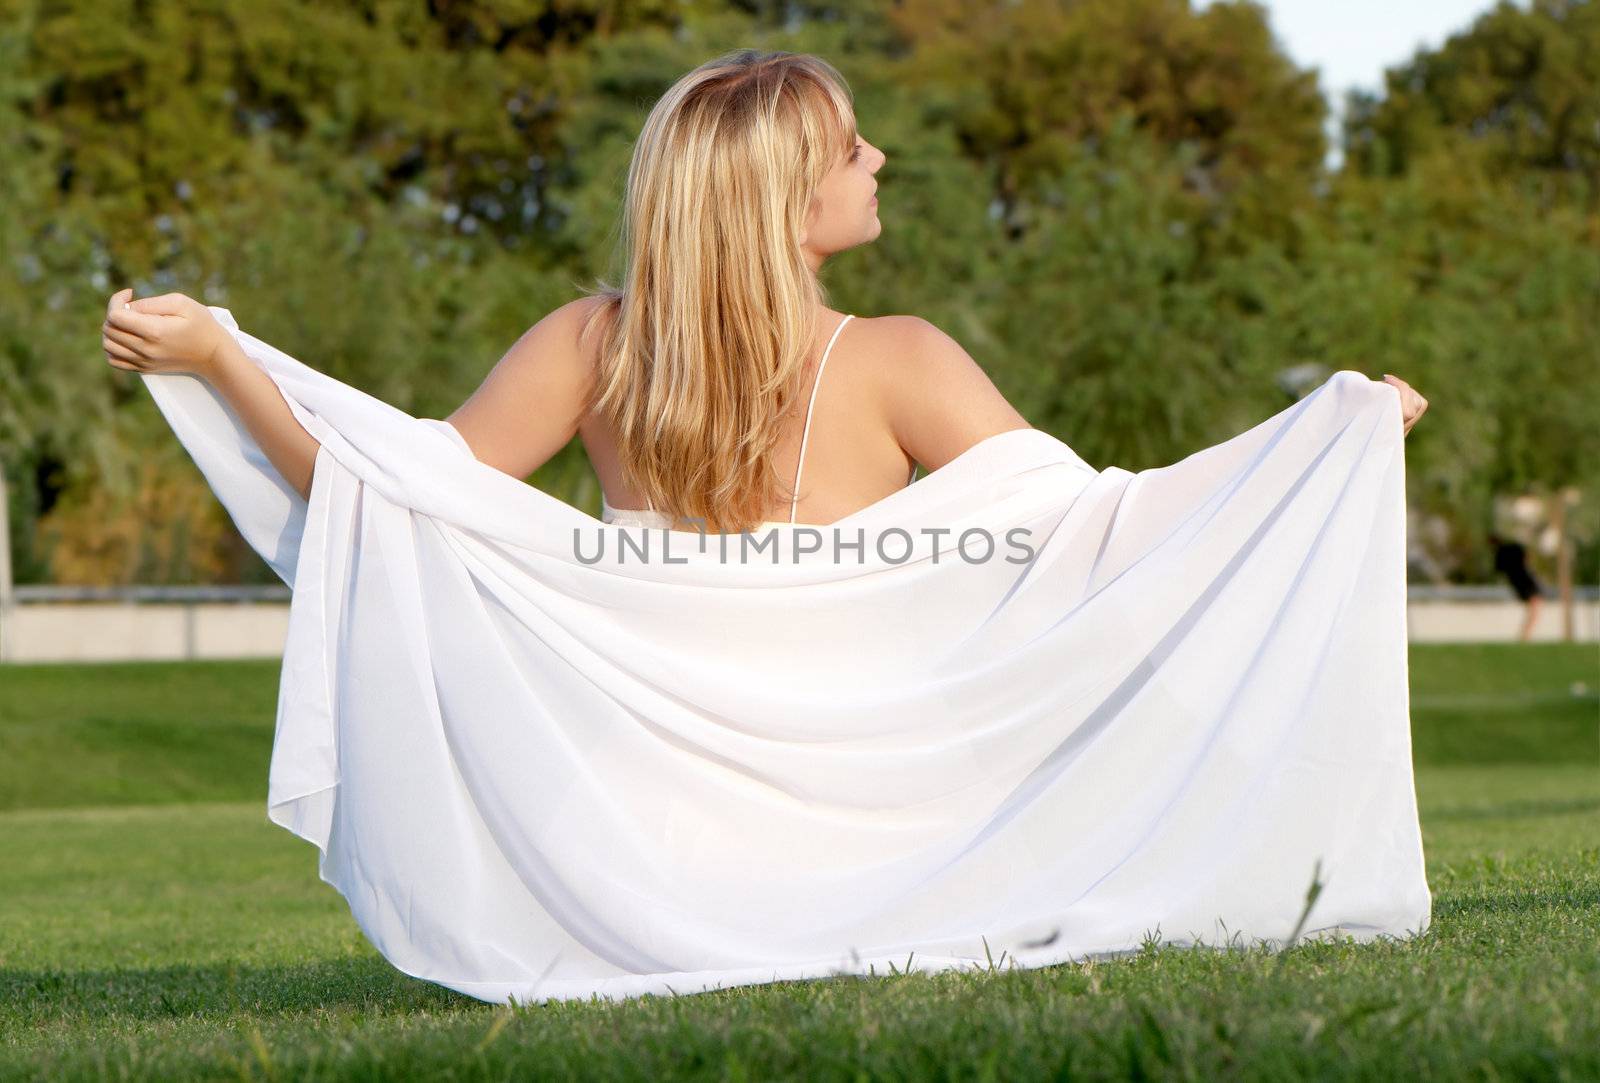 The girl with a shawl sitting on a grass in park by Anpet2000